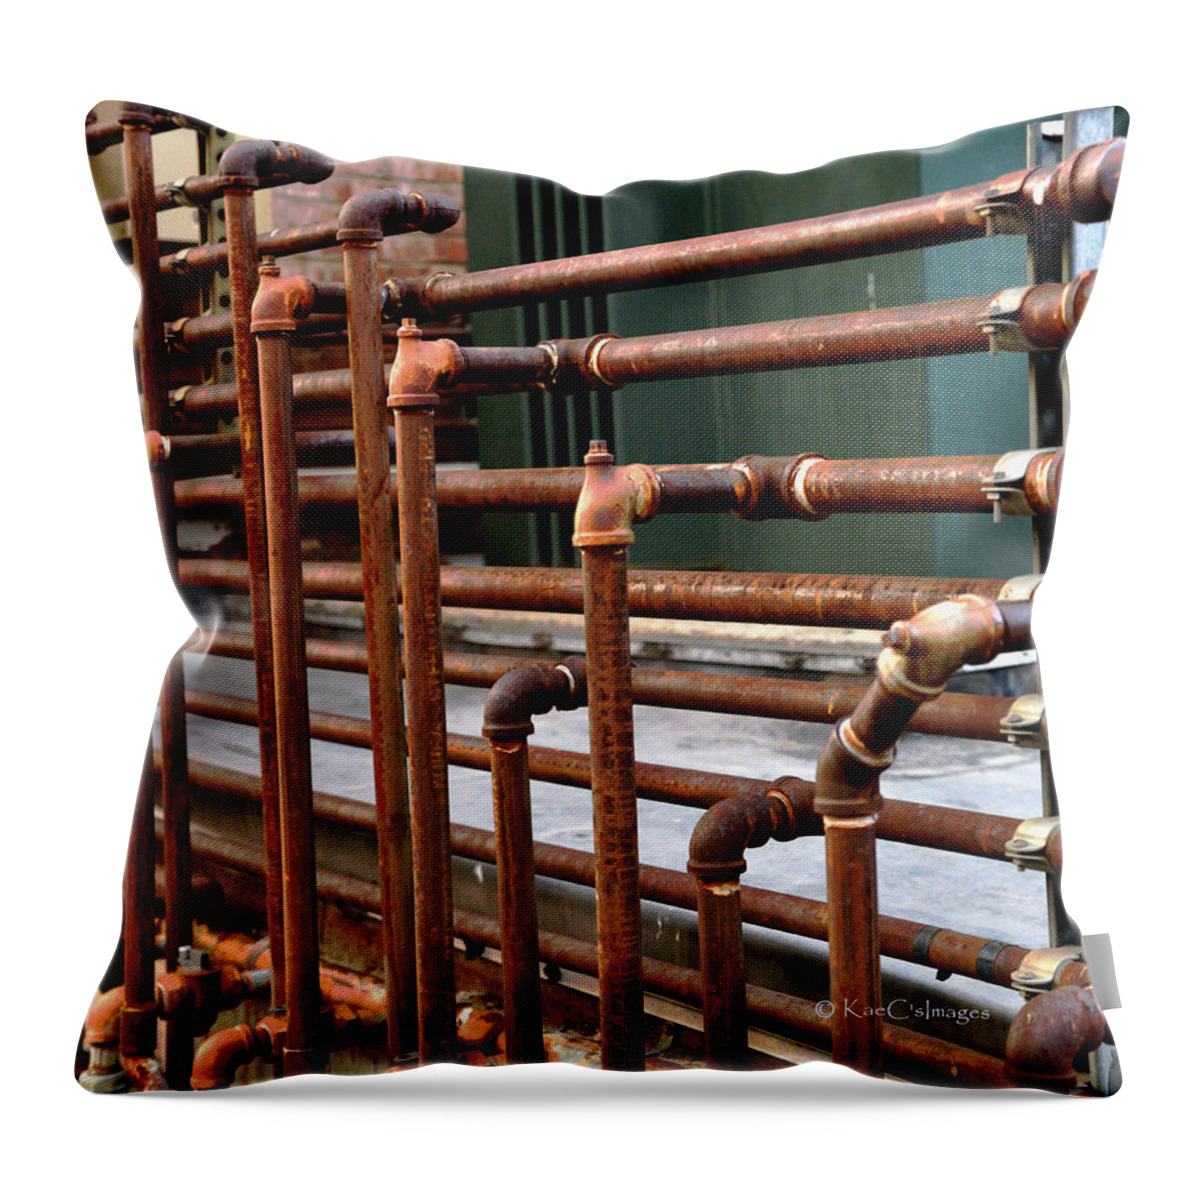 Gas Pipelines Throw Pillow featuring the photograph Gas Pipes and Fittings by Kae Cheatham